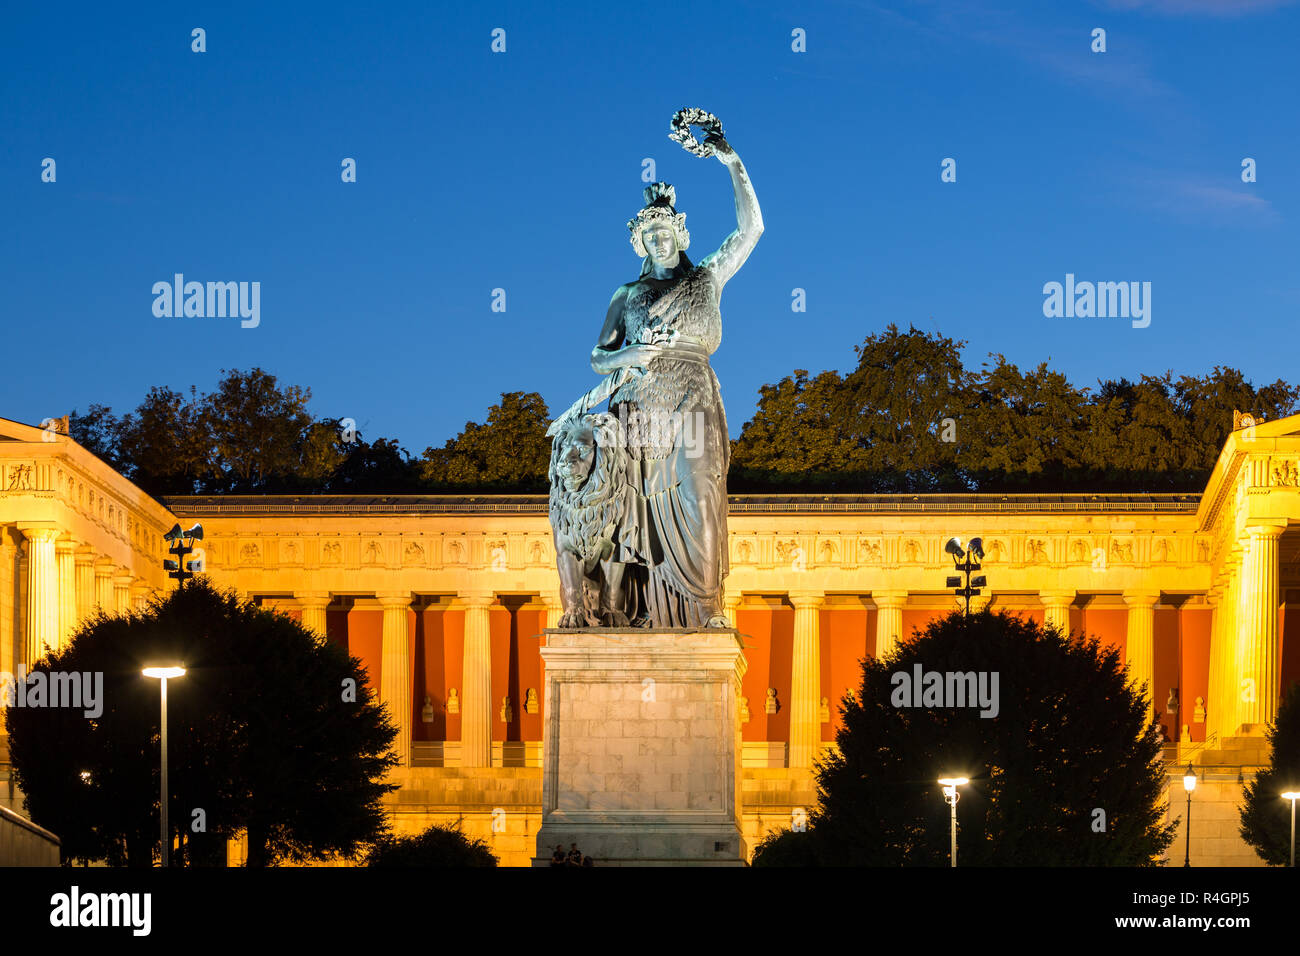 Bronze statue Bavaria in front of Hall of Fame, dusk, Theresienwiese, Munich, Germany Stock Photo